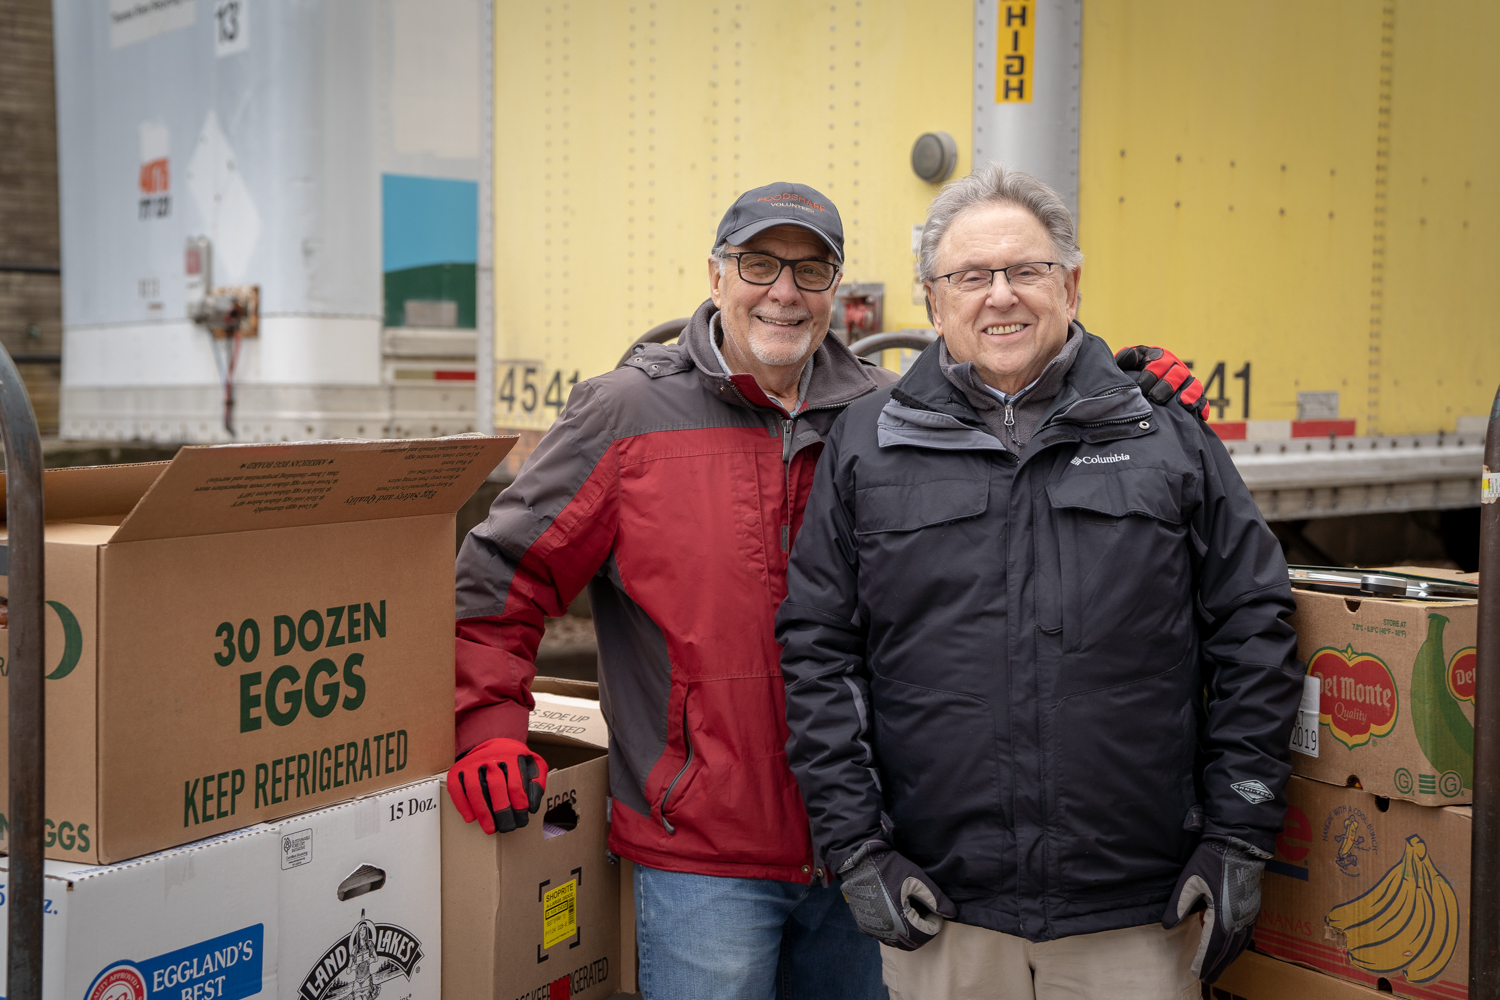 Andy Stern and Peter Chenette Retail Rescue